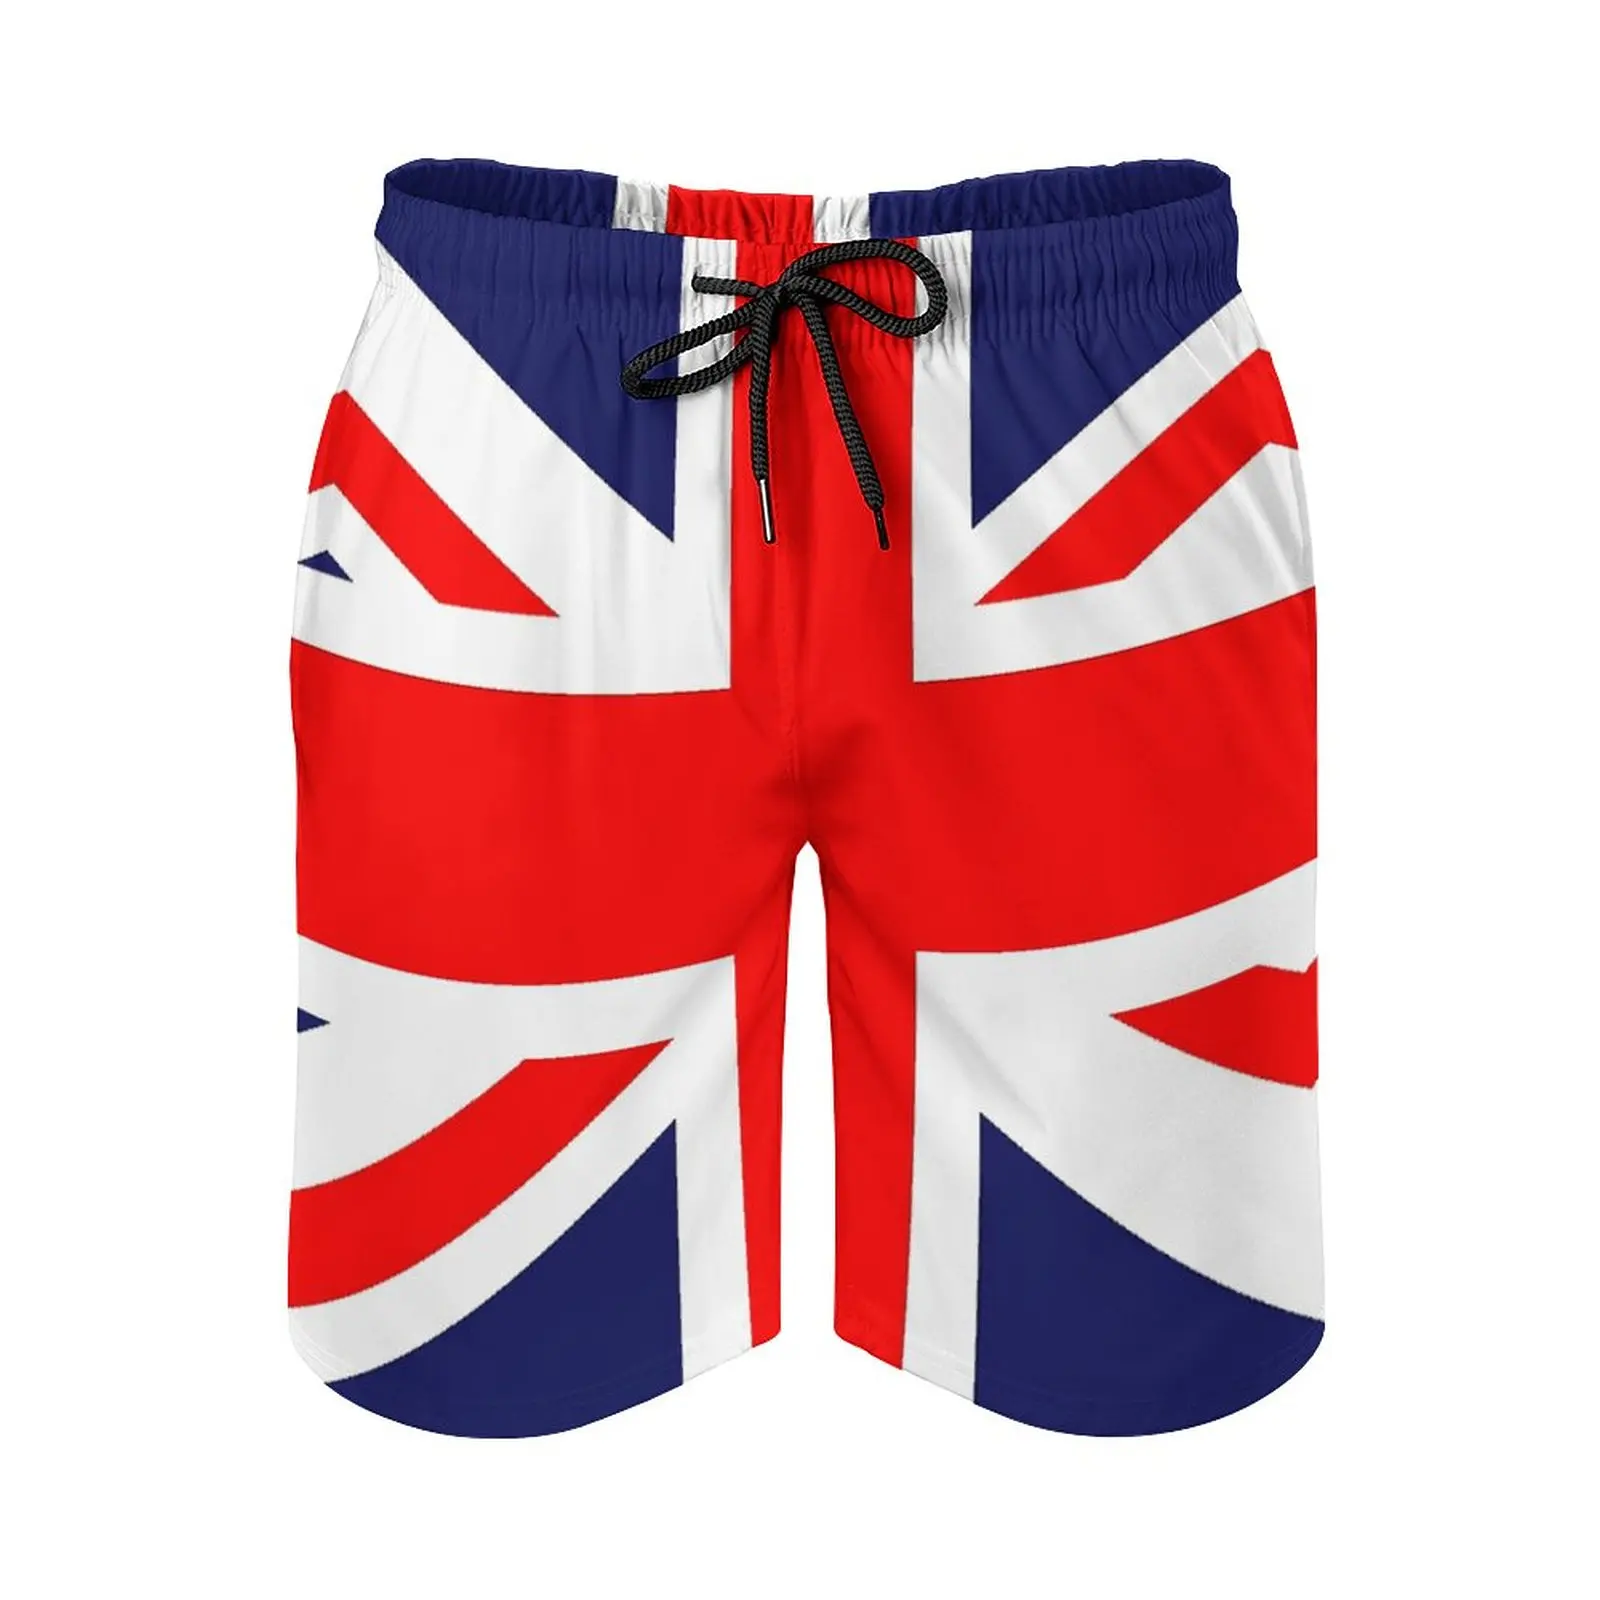 

Flag of Great Britain Union Jack Anime CausalGraphic Cool Adjustable Drawstring Breathable Quick Dry Men's Beach Shortsrunning L